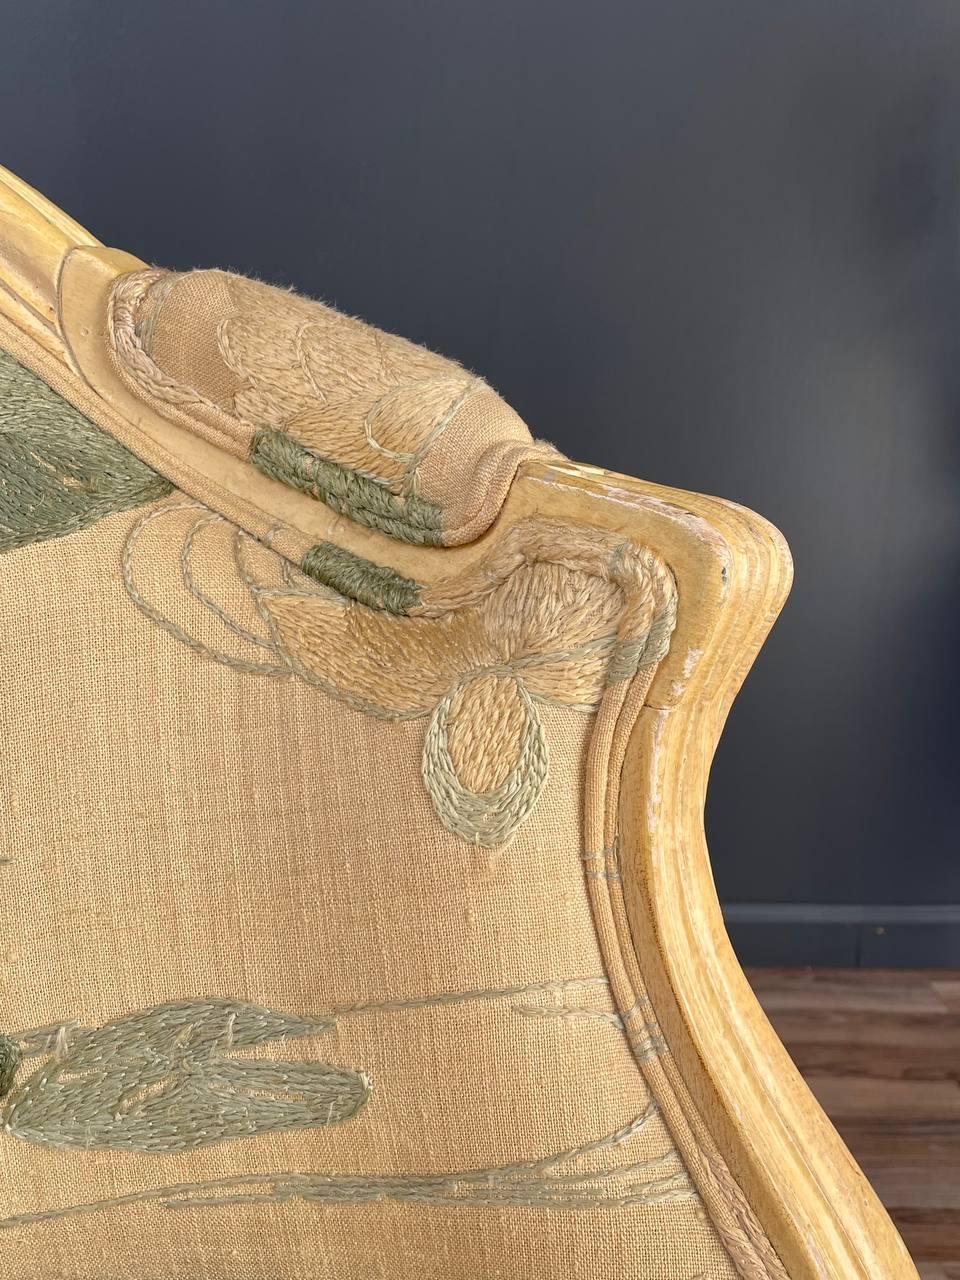 Pair of French Louis XVI Style Carved Chairs with an Antiqued Paint Finish For Sale 2